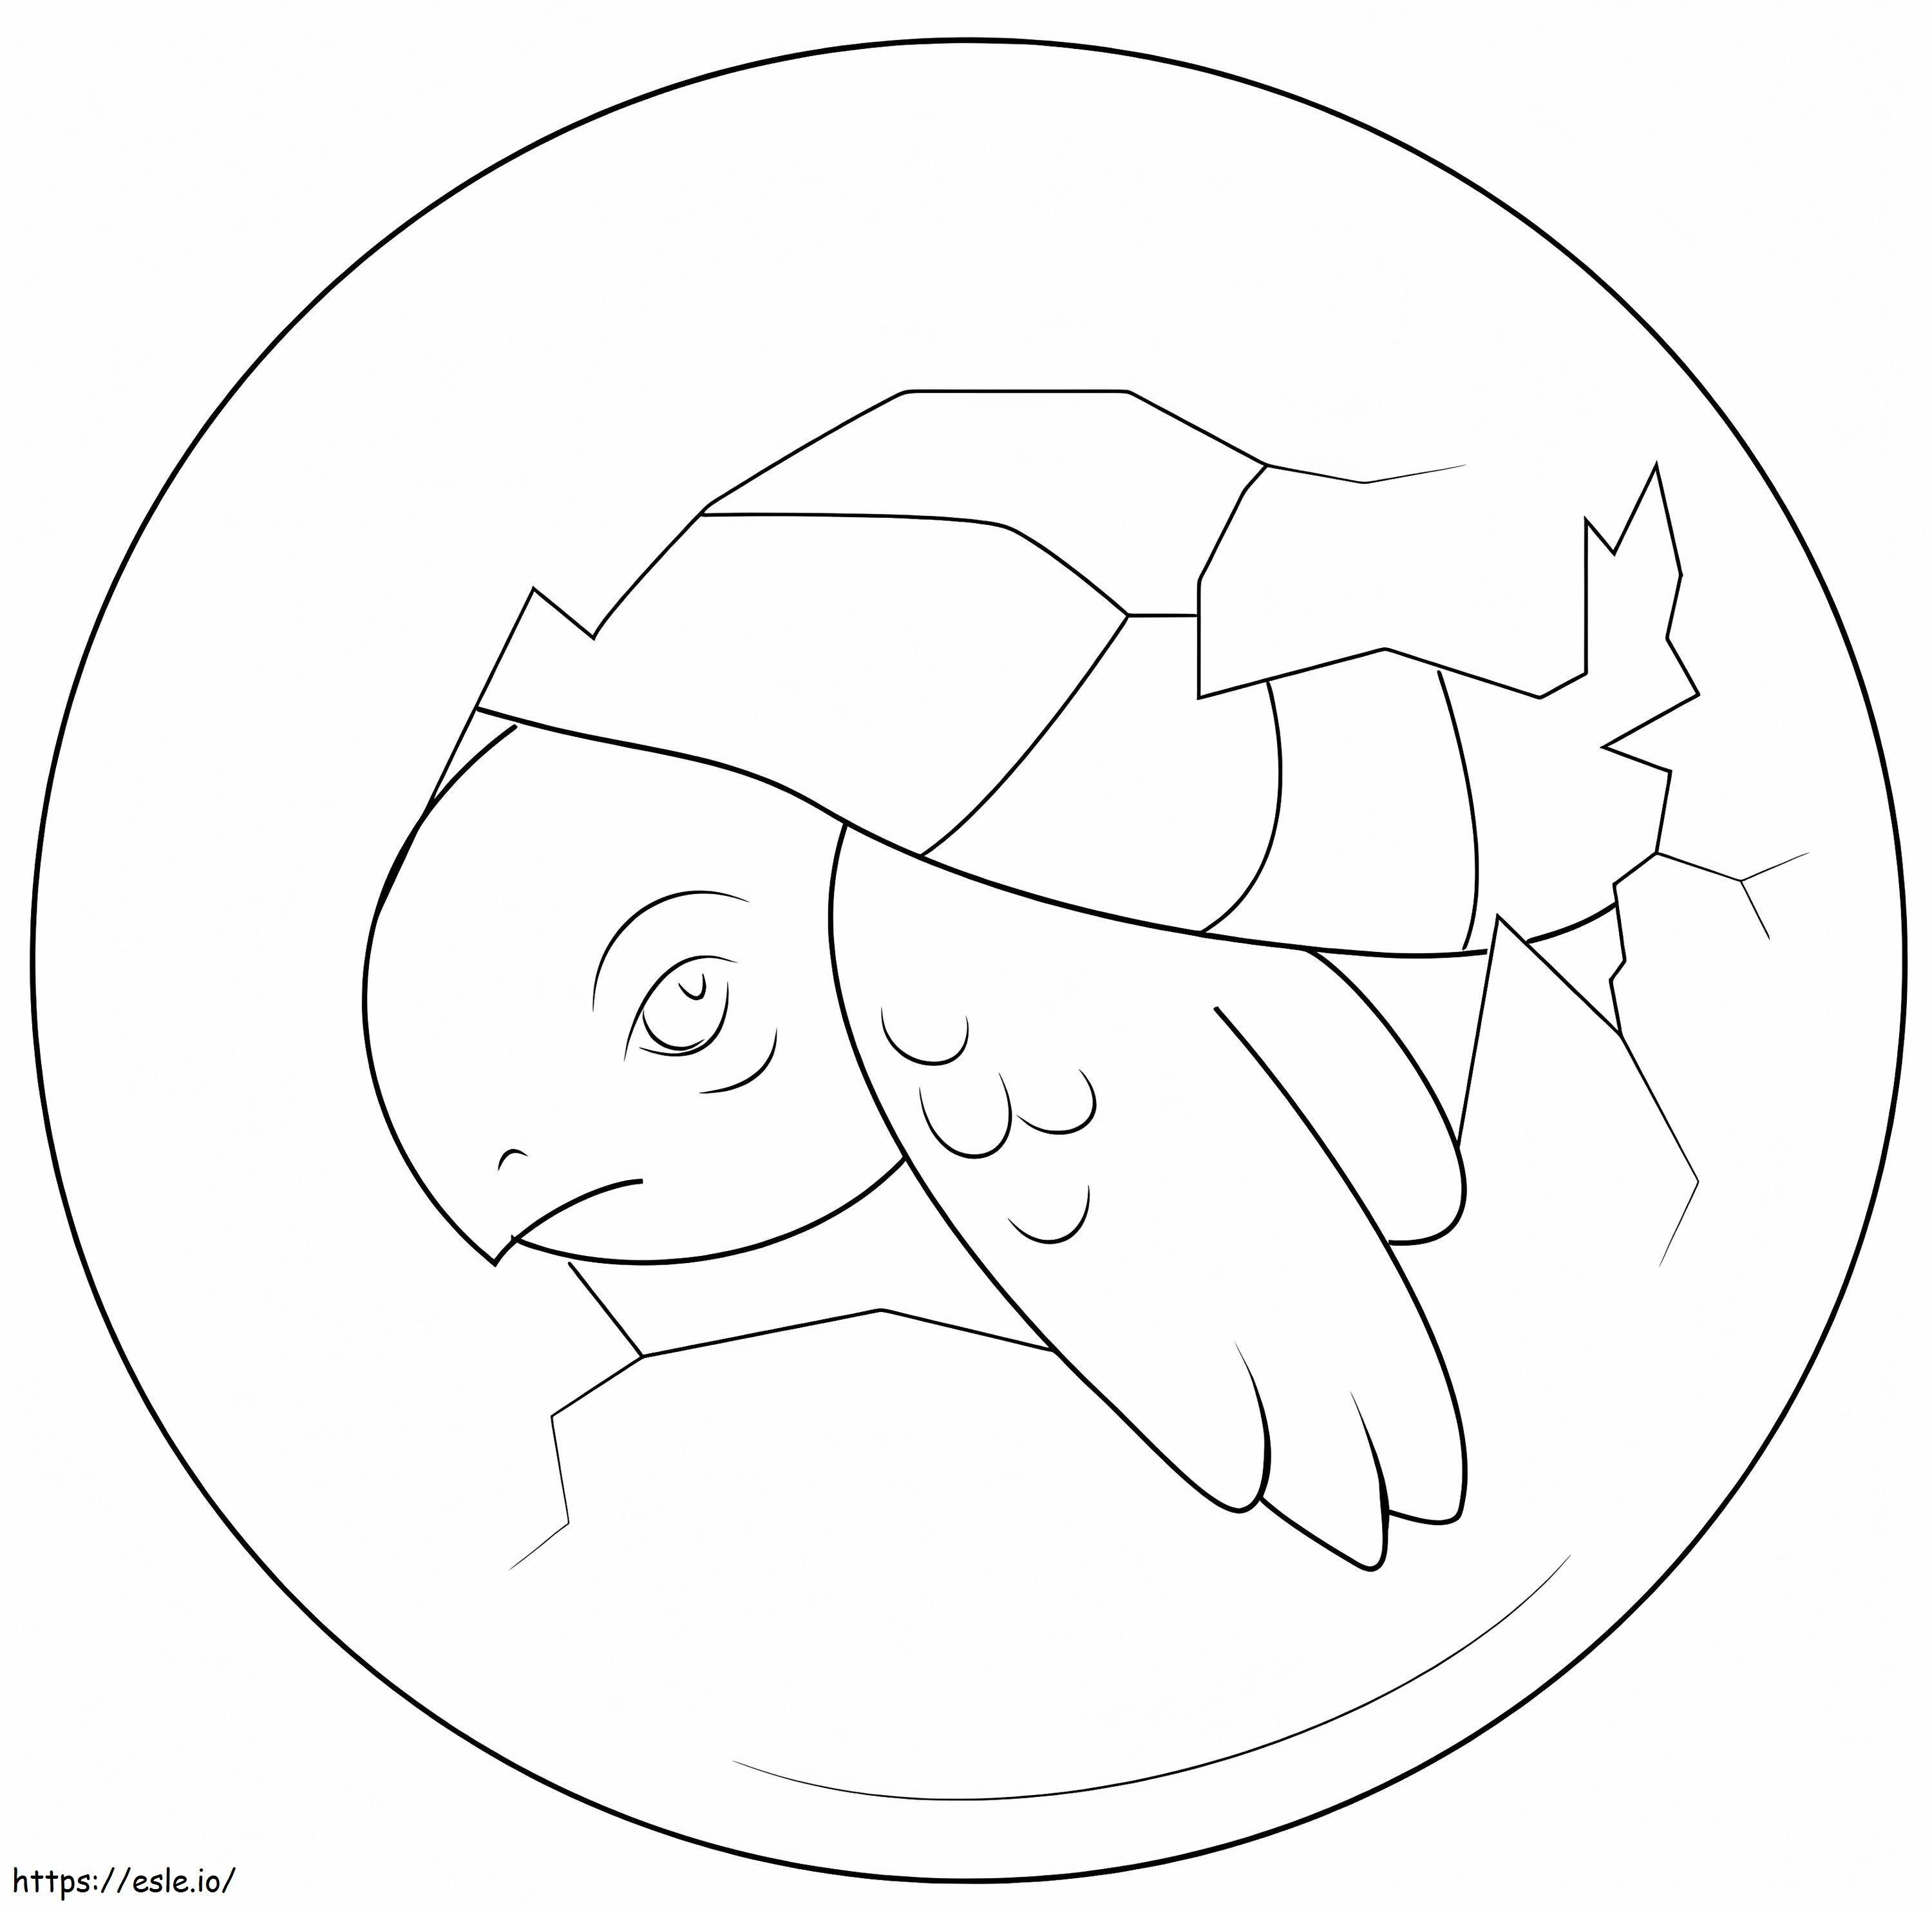 Baby Turtle Hatching From Egg coloring page